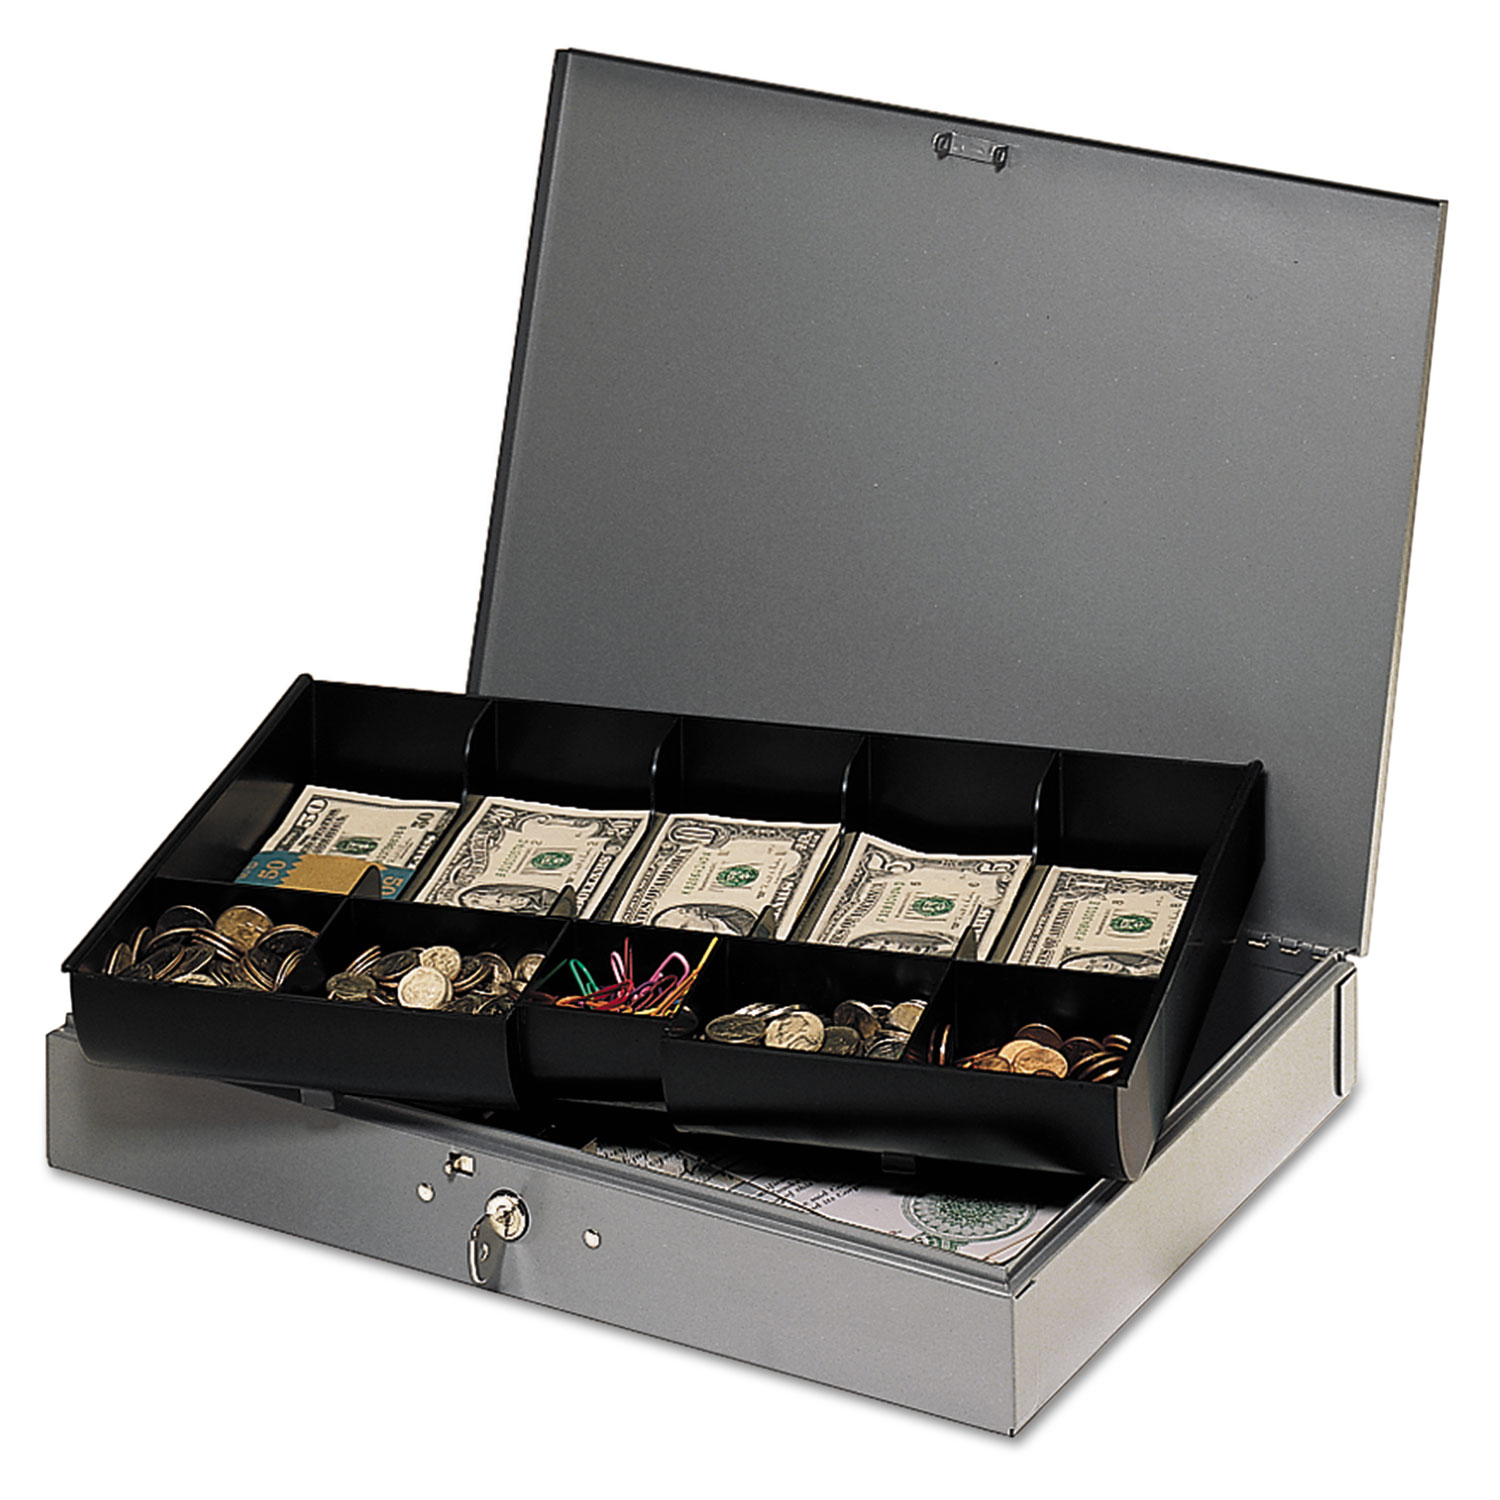  SteelMaster 2215CBTGY Extra-Wide Steel Cash Box w/10 Compartments, Key Lock, Gray (MMF2215CBTGY) 